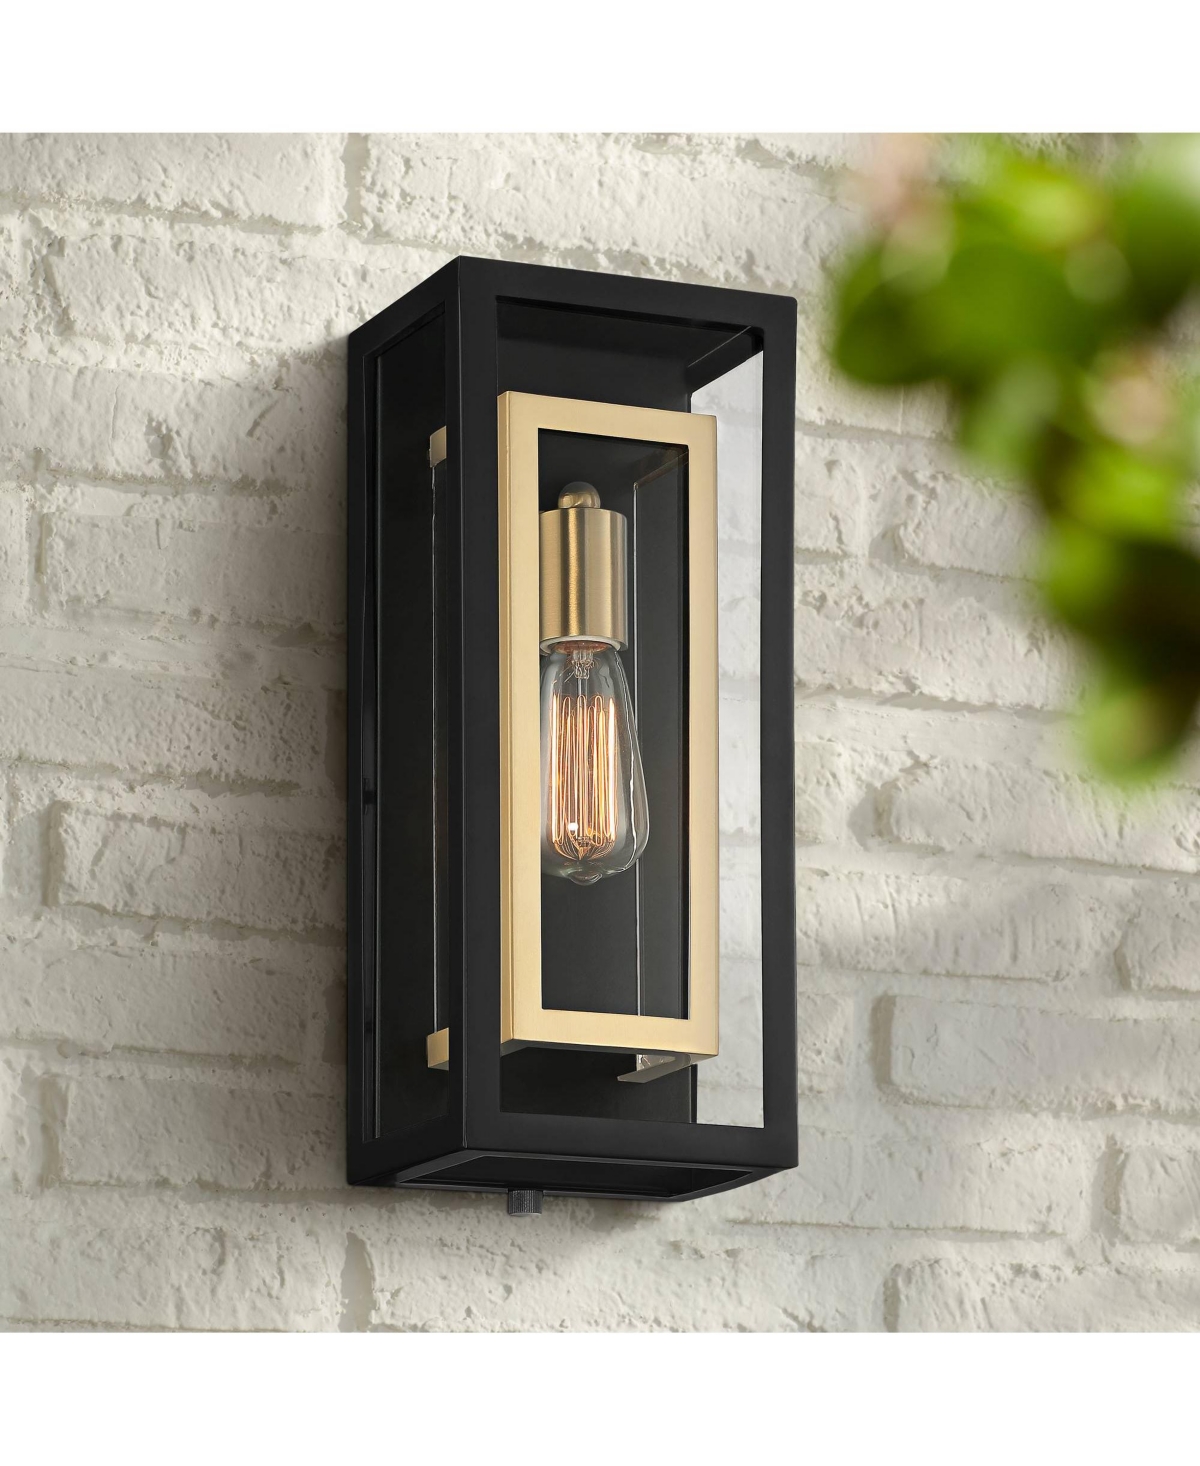 Double Box Industrial Outdoor Wall Light Fixture Matte Black Warm Brass Metal 15 1/2" Clear Glass Panel for Exterior House Porch Patio Outside Deck Ga